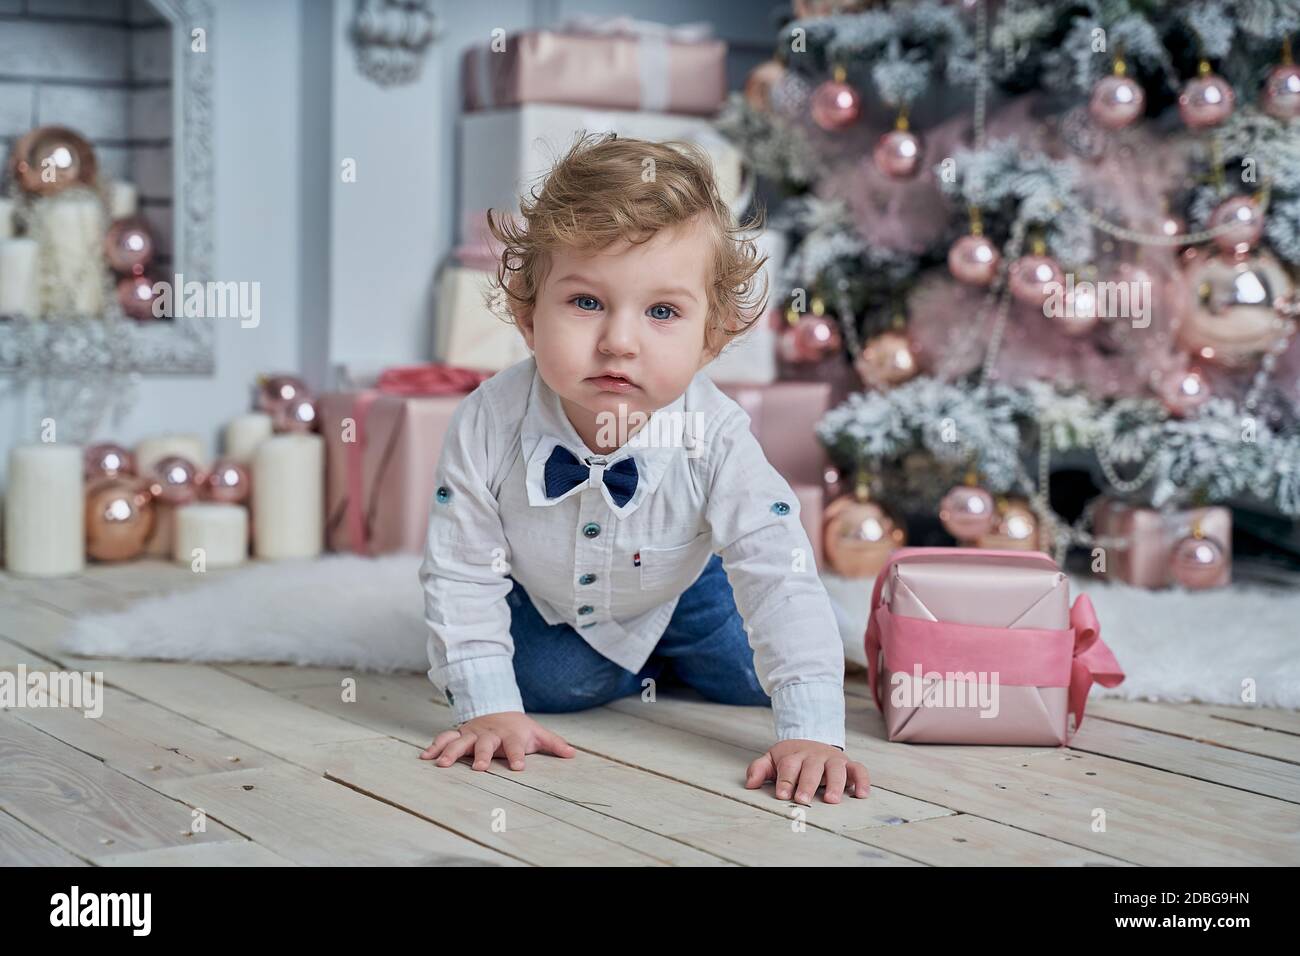 Little funny baby next to the Christmas tree Stock Photo